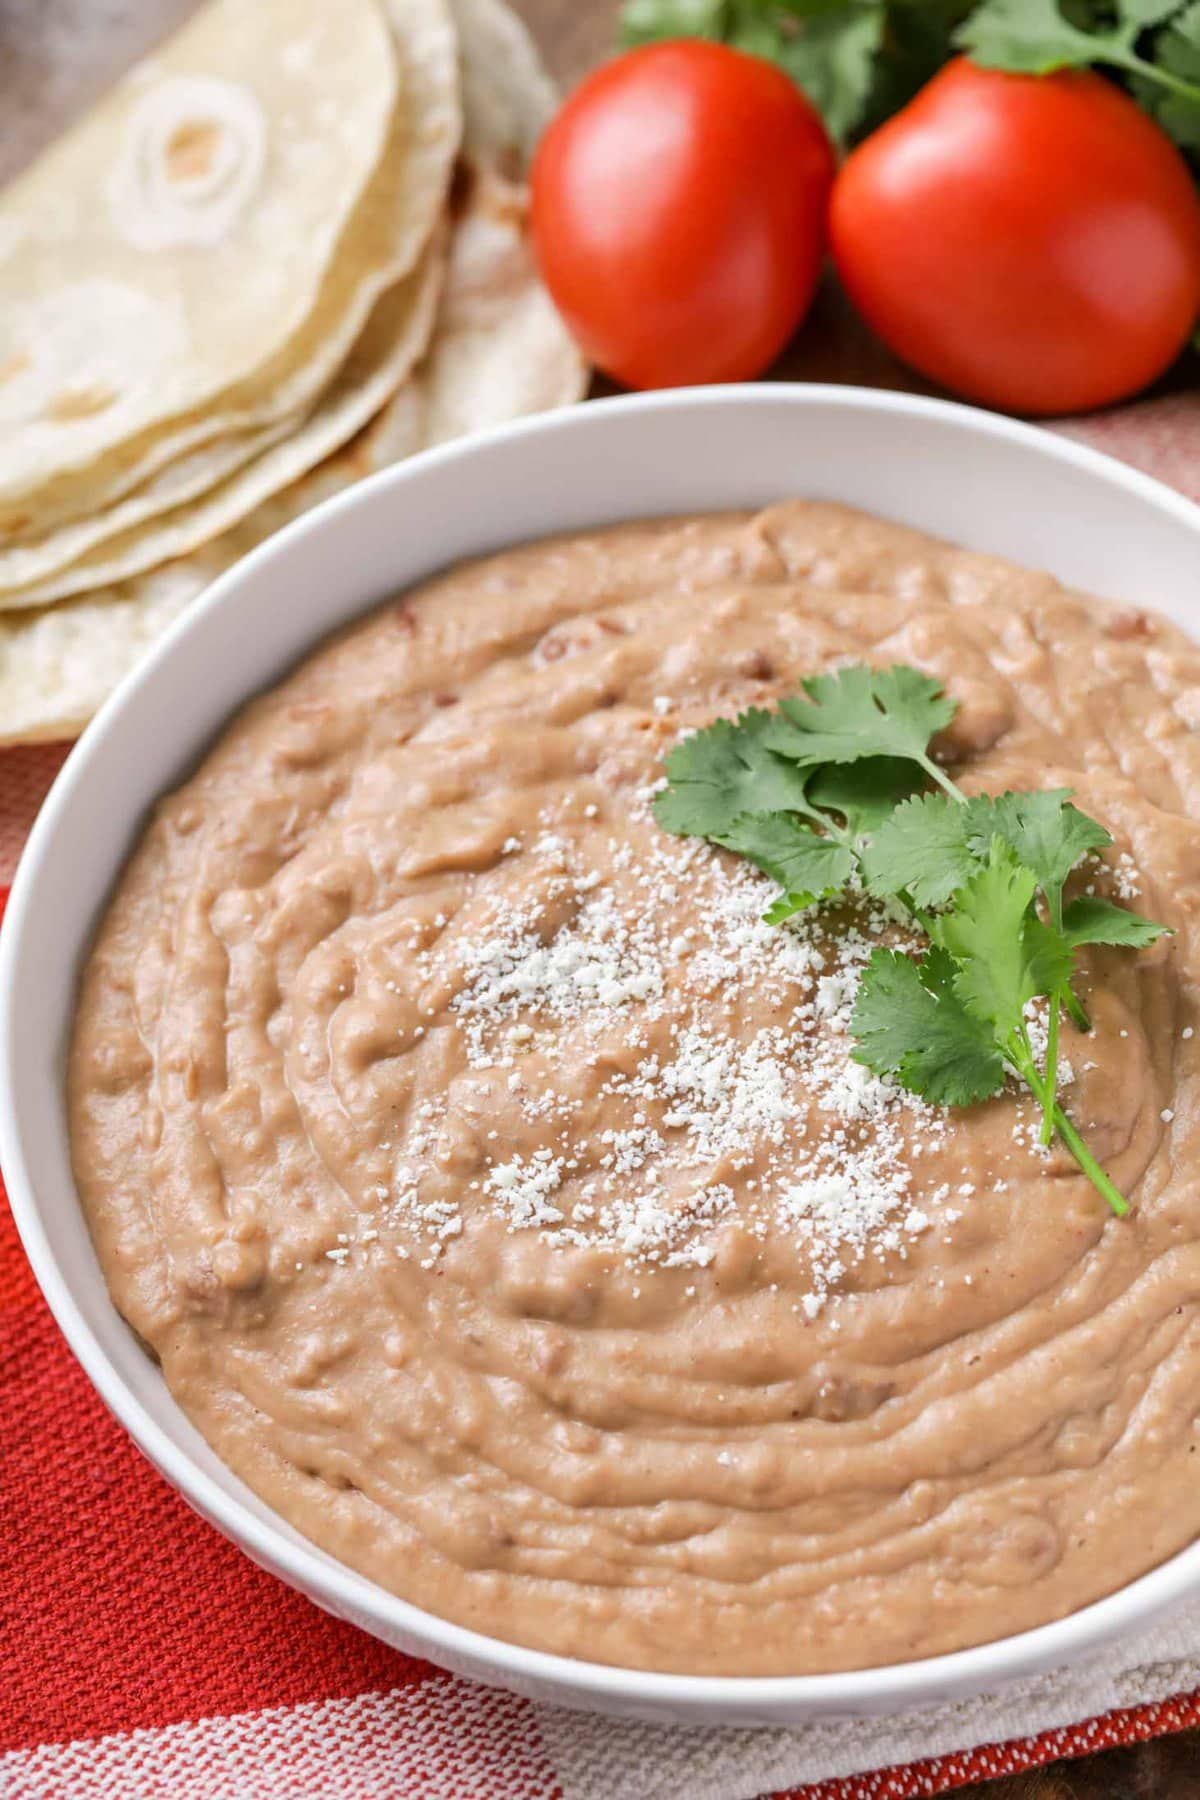 Restaurant-Style Refried Beans - The Easy Way! | Lil' Luna